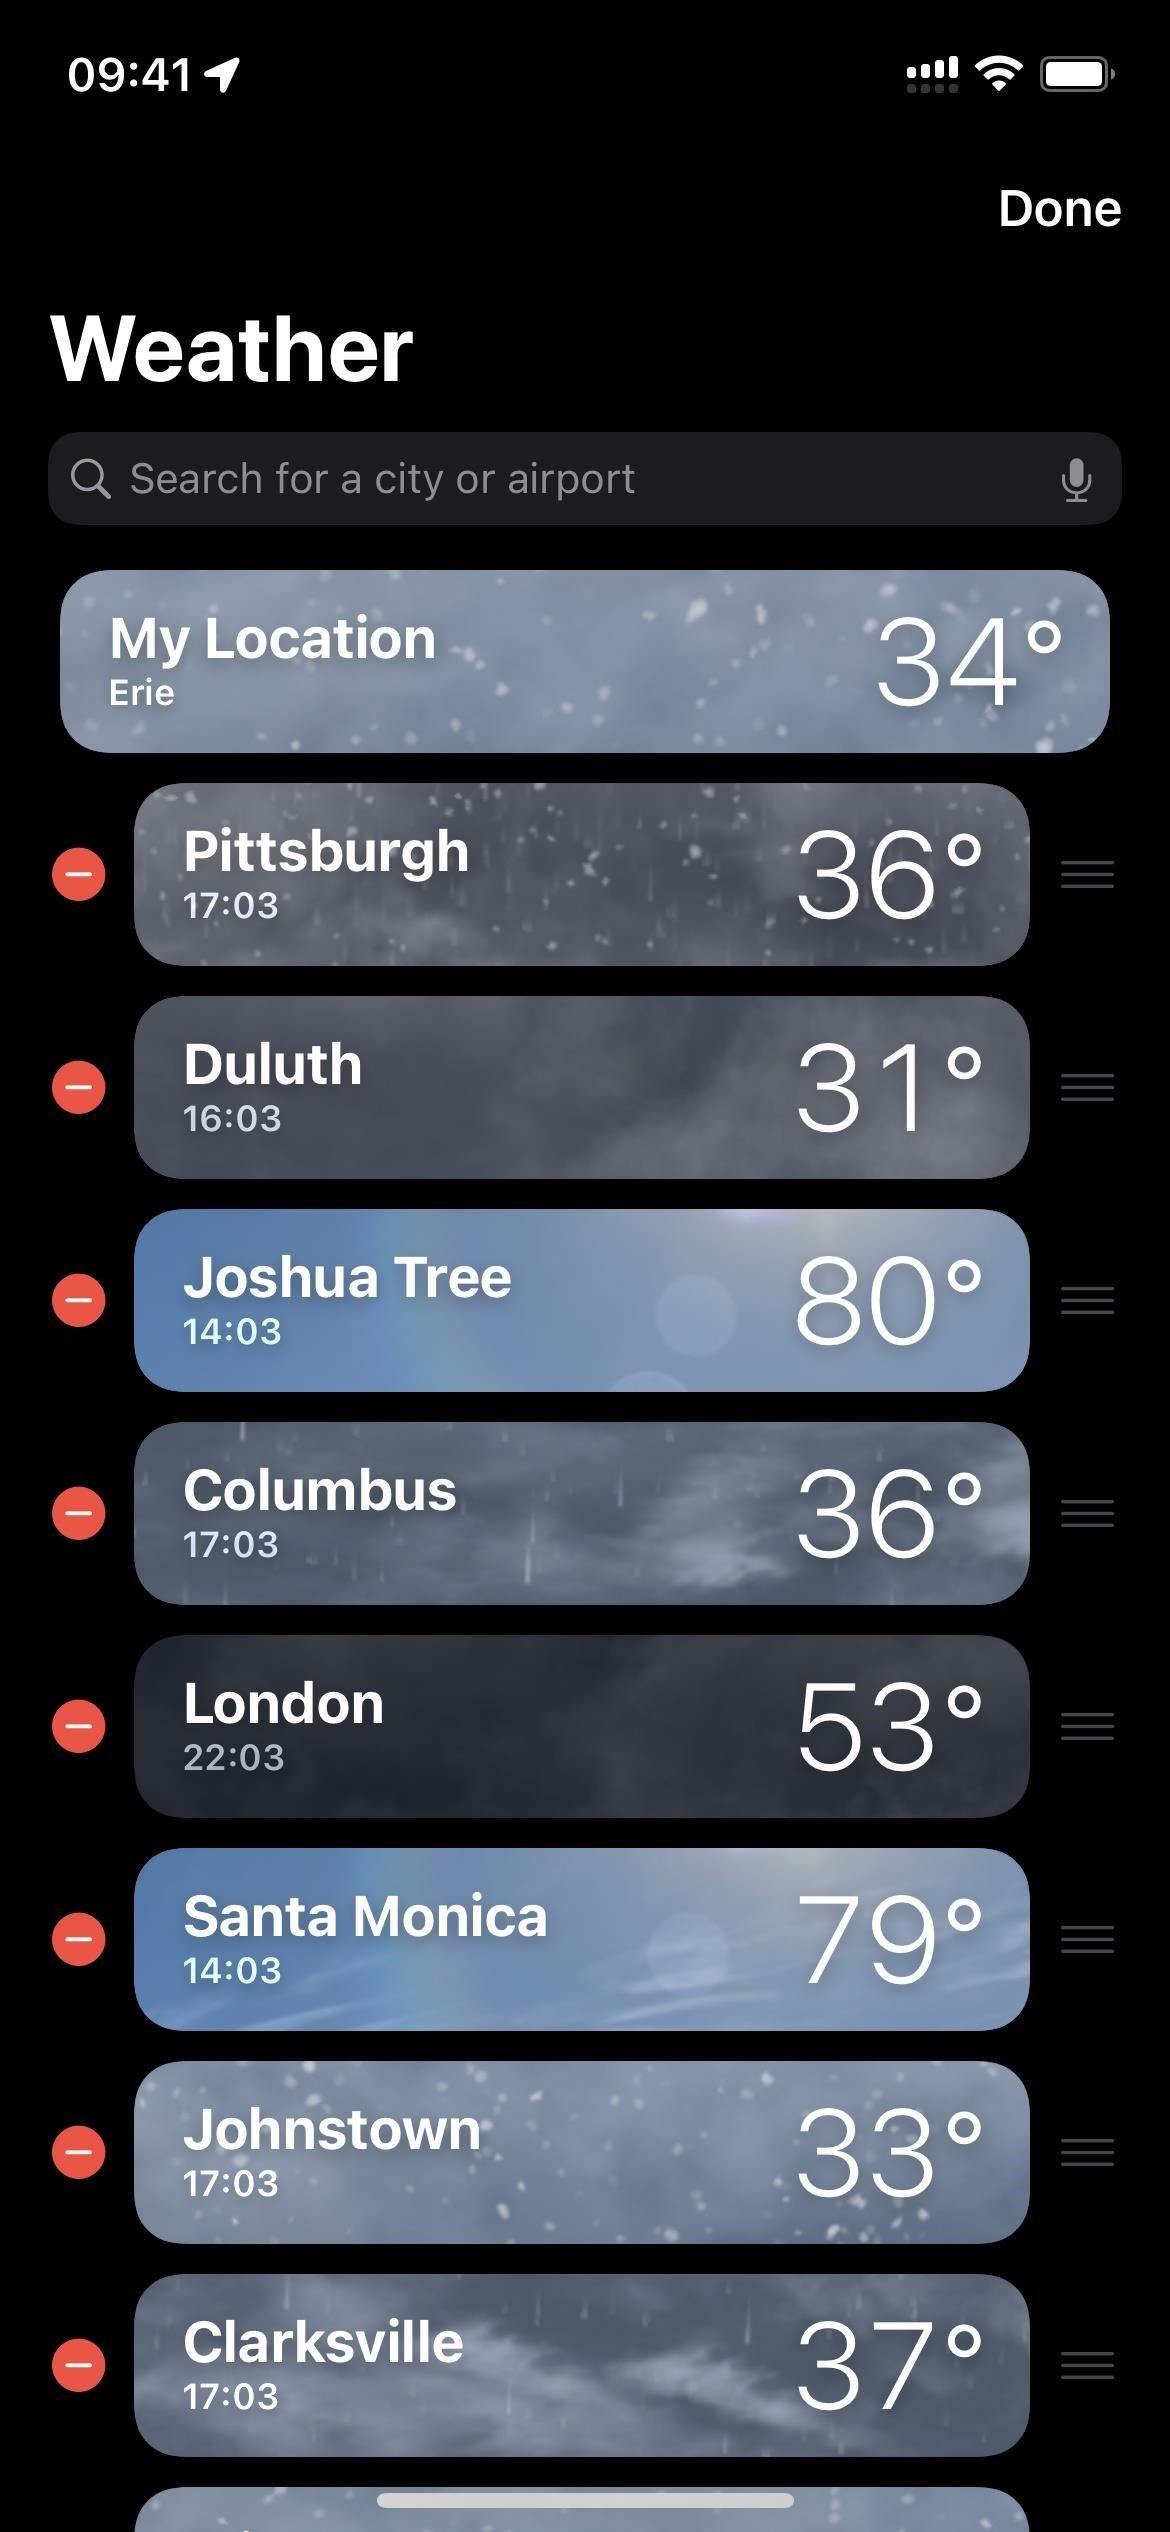 Your iPhone's Weather App Has a Crazy Number of Customization Options You Probably Didn't Know About